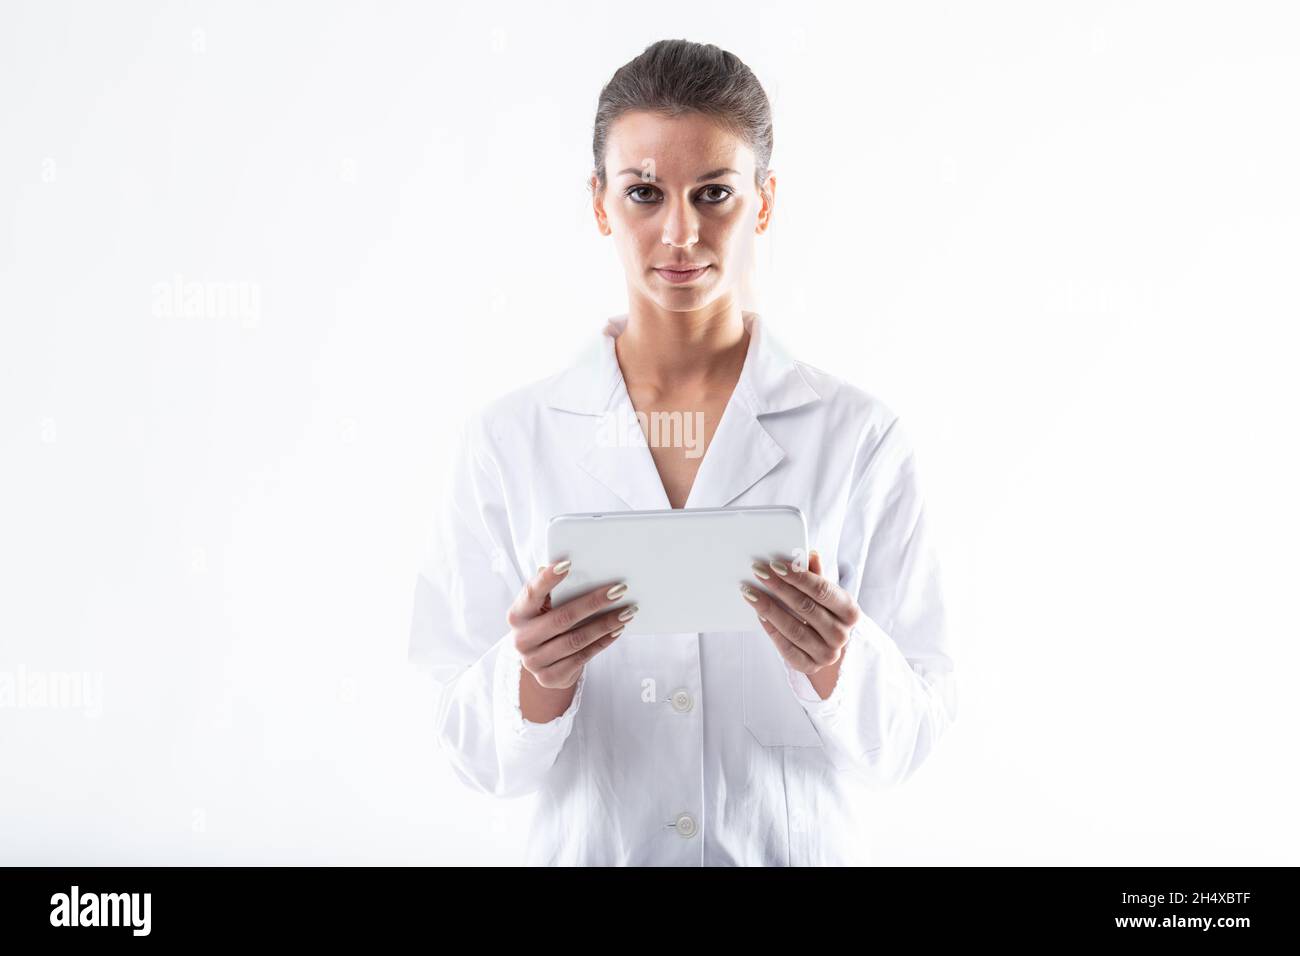 Attractive young female doctor or nurse in a white lab coat standing looking at the camera holding a tablet-pc with a serious thoughtful expression is Stock Photo